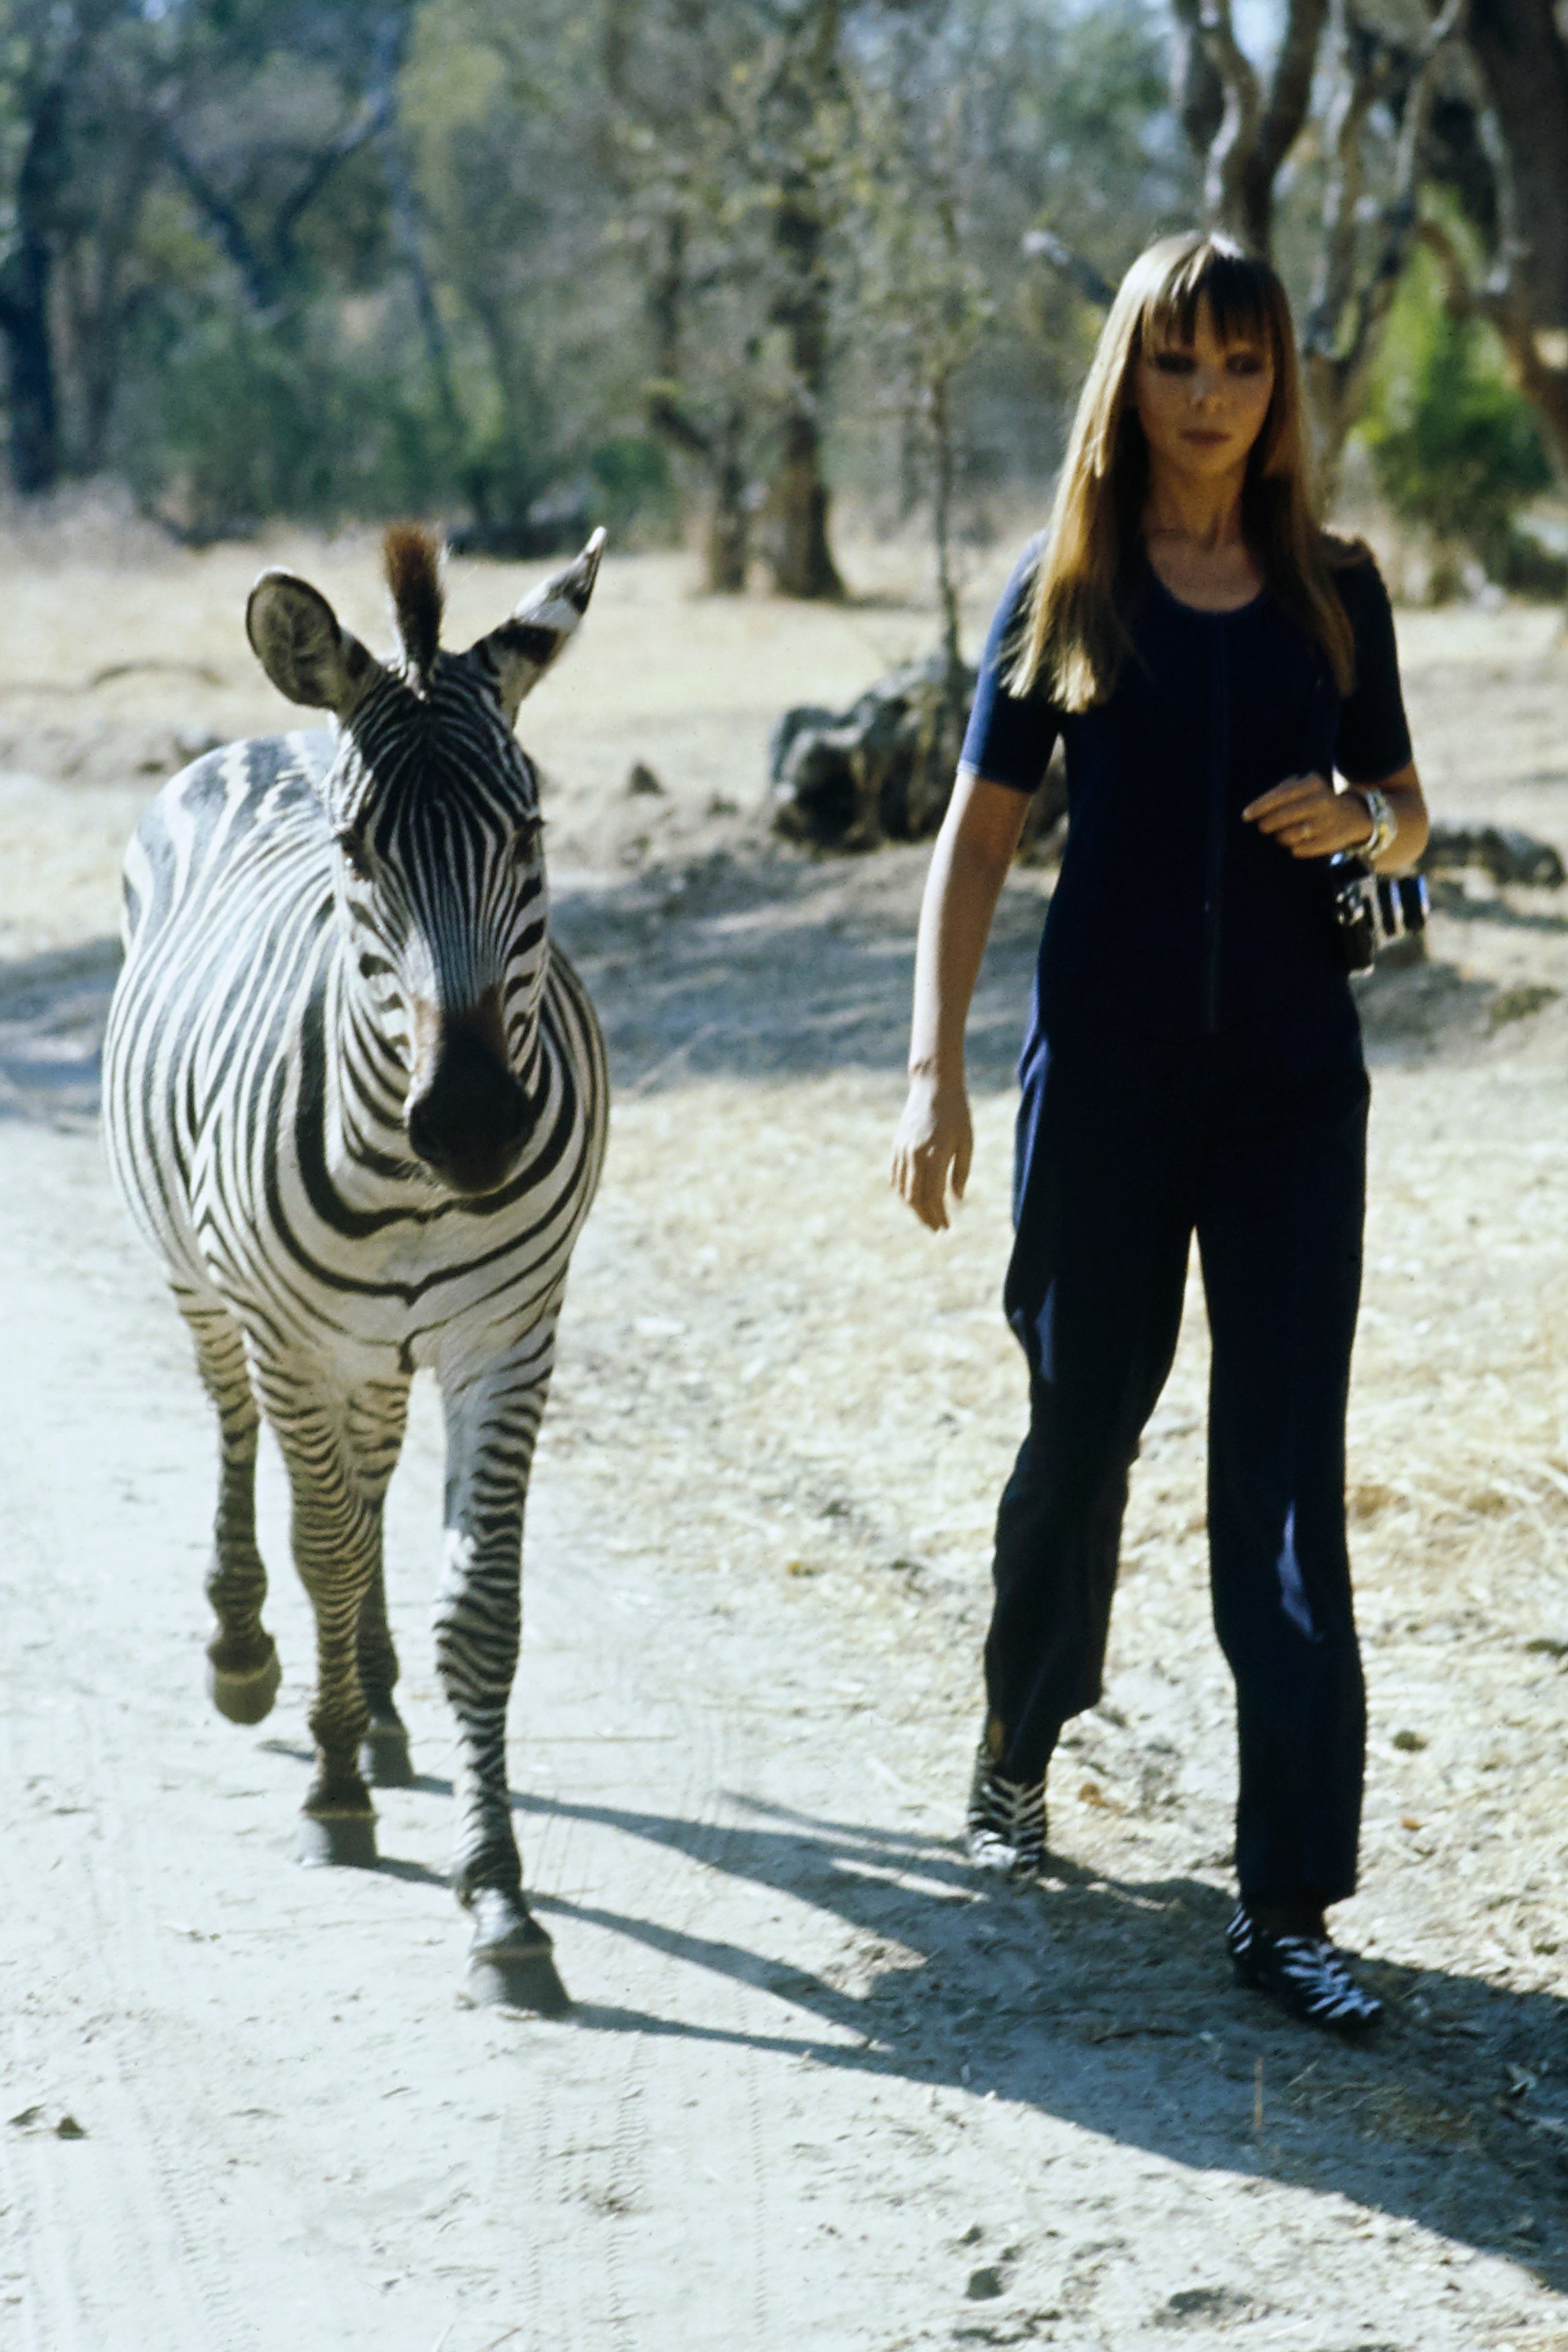 Vogue January 01 1971  Model Penelope Tree in Zambia's Livingstone game reserve walking along a dirt road with a zebra...